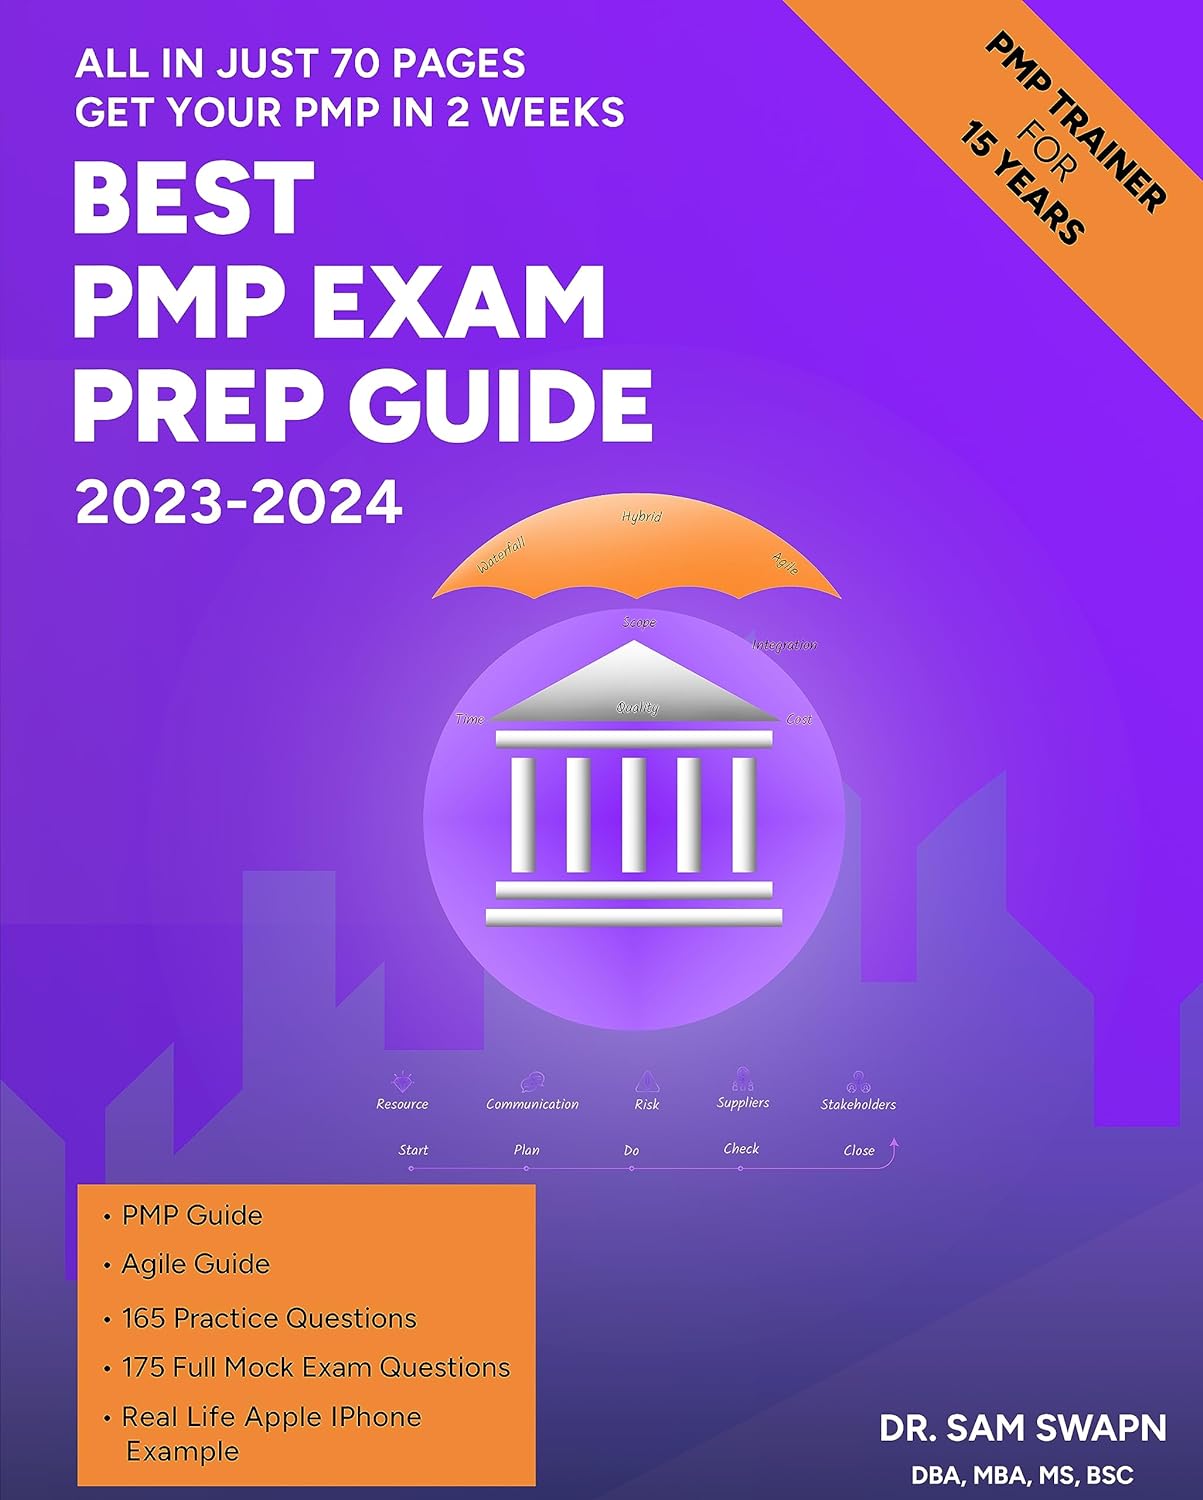 Introducing a Game-Changing PMP Certification Guide: Dr. Sam Swapn Sinha’s 'Best PMP Exam Prep Guide 2023-2024'